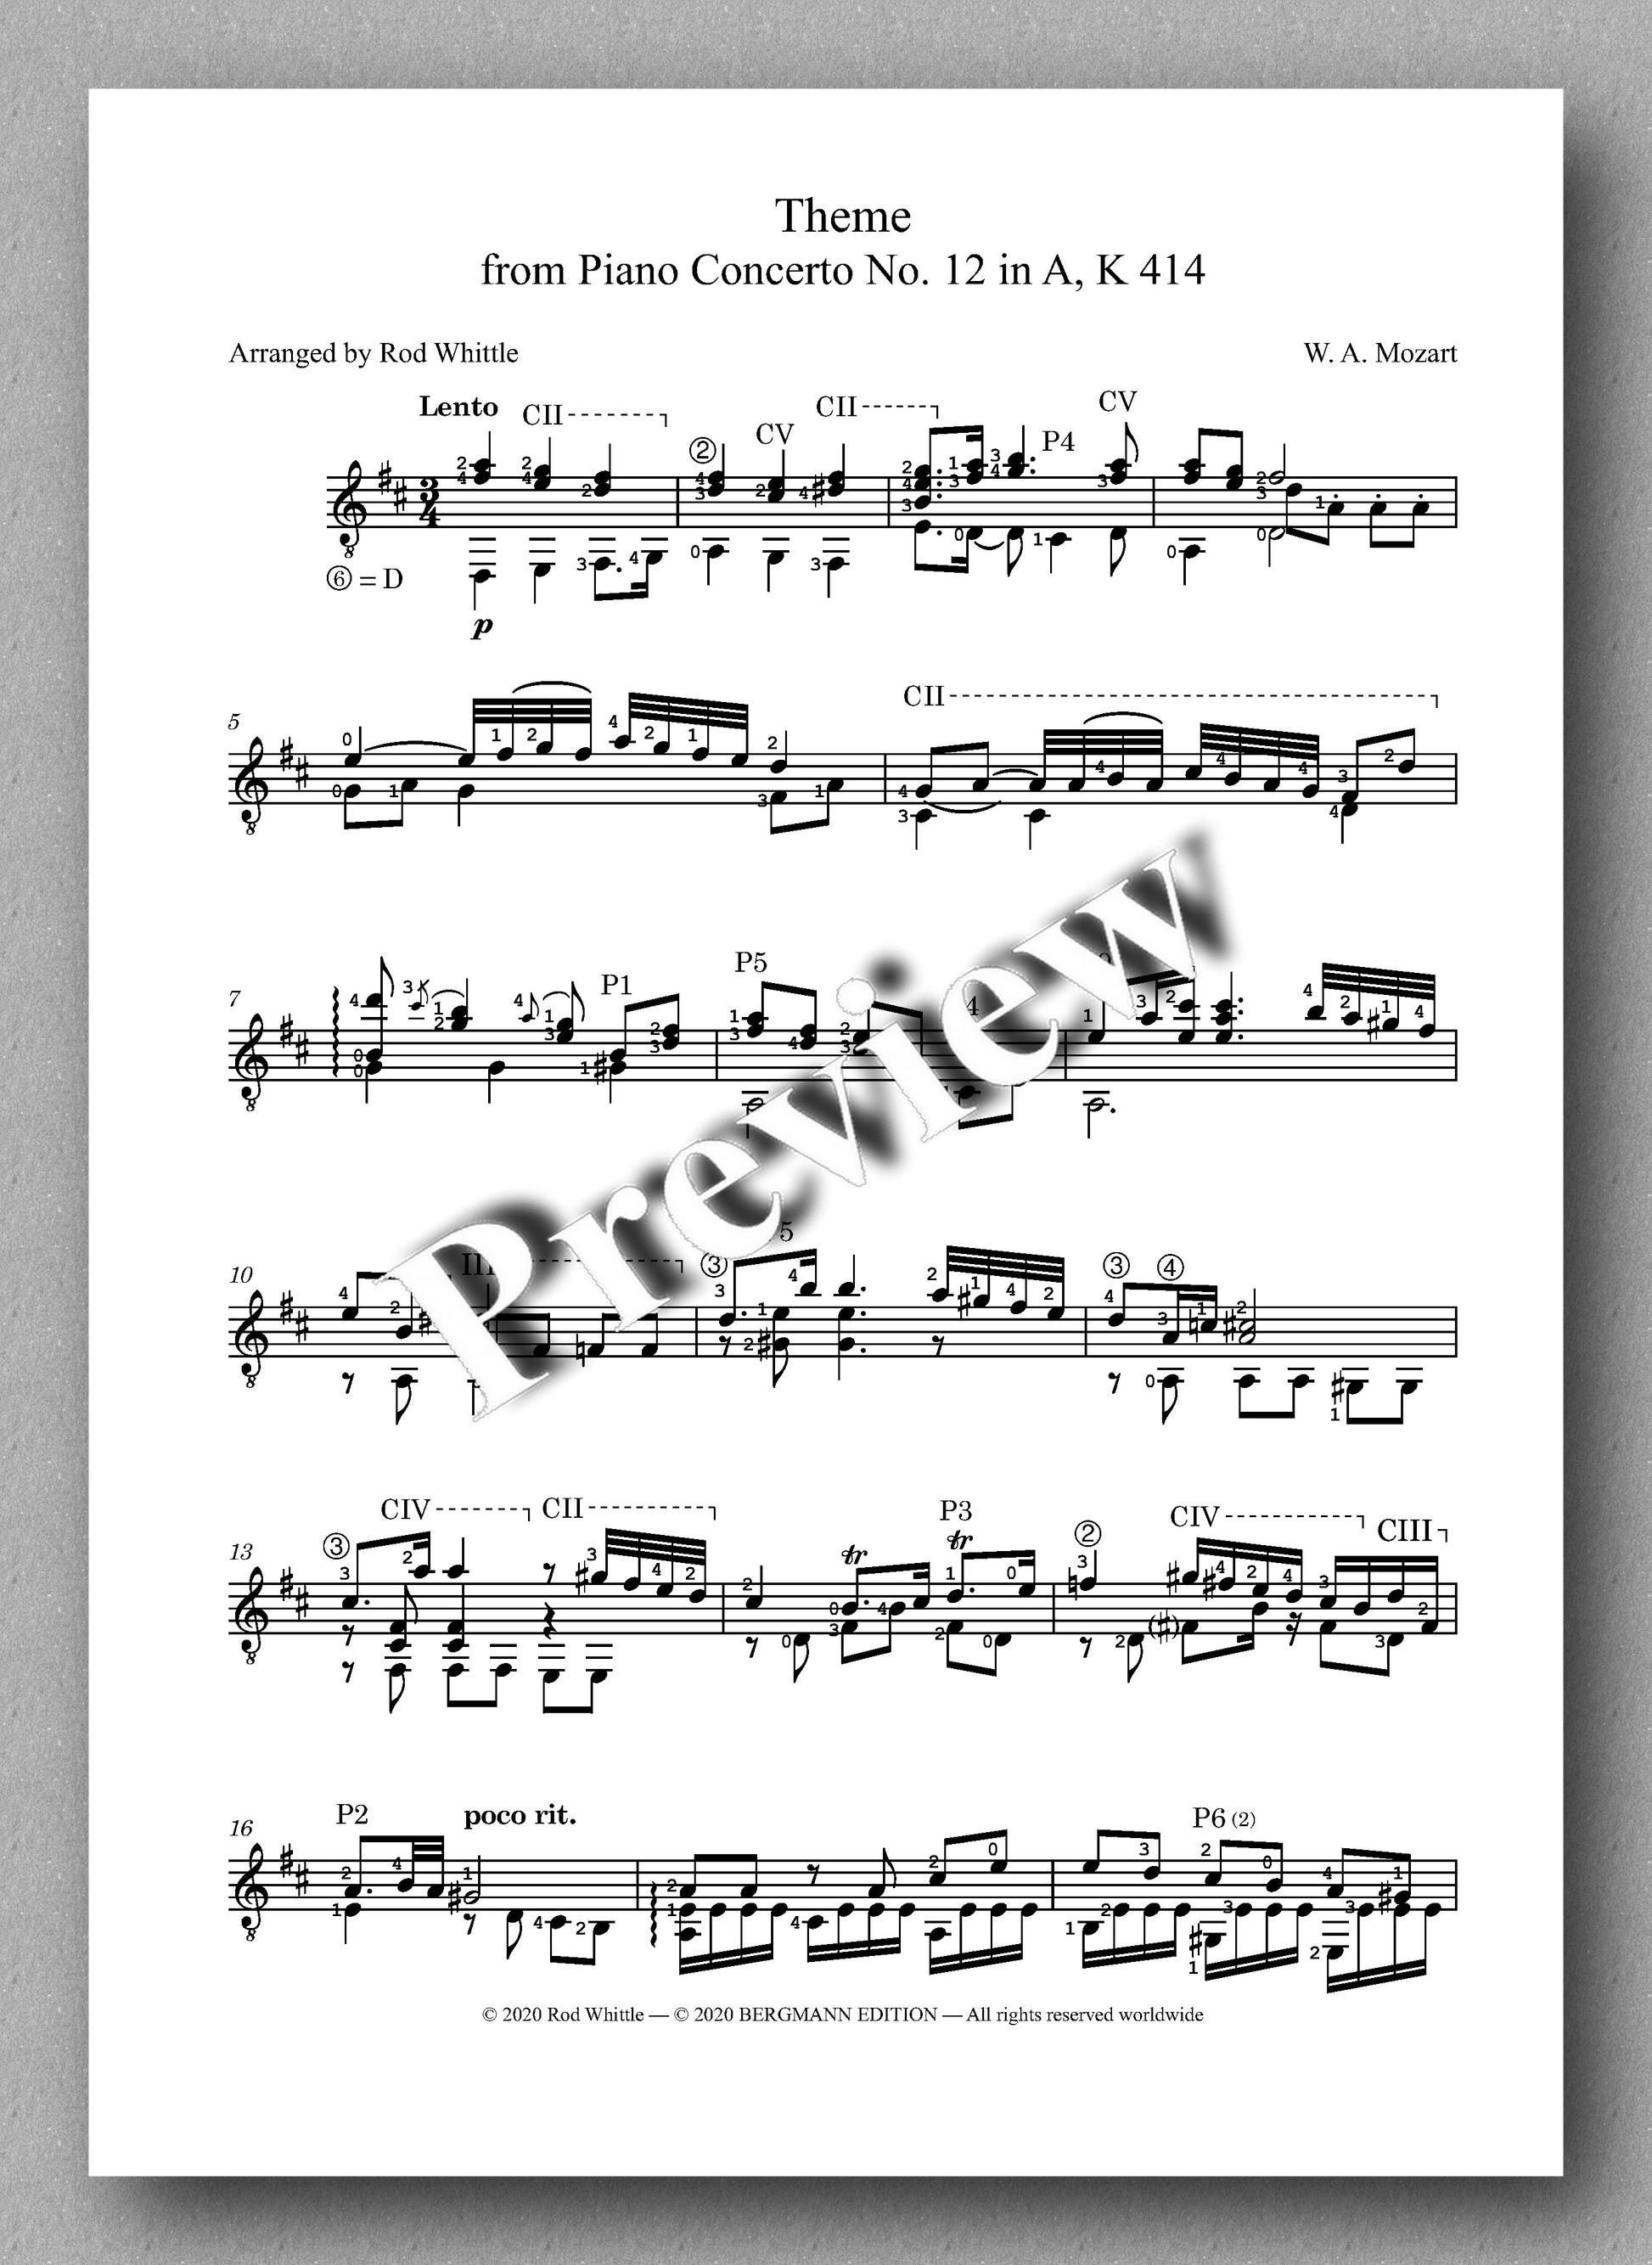 Mozart-Whittle, Two Pieces by Mozart - preview of the music score 1